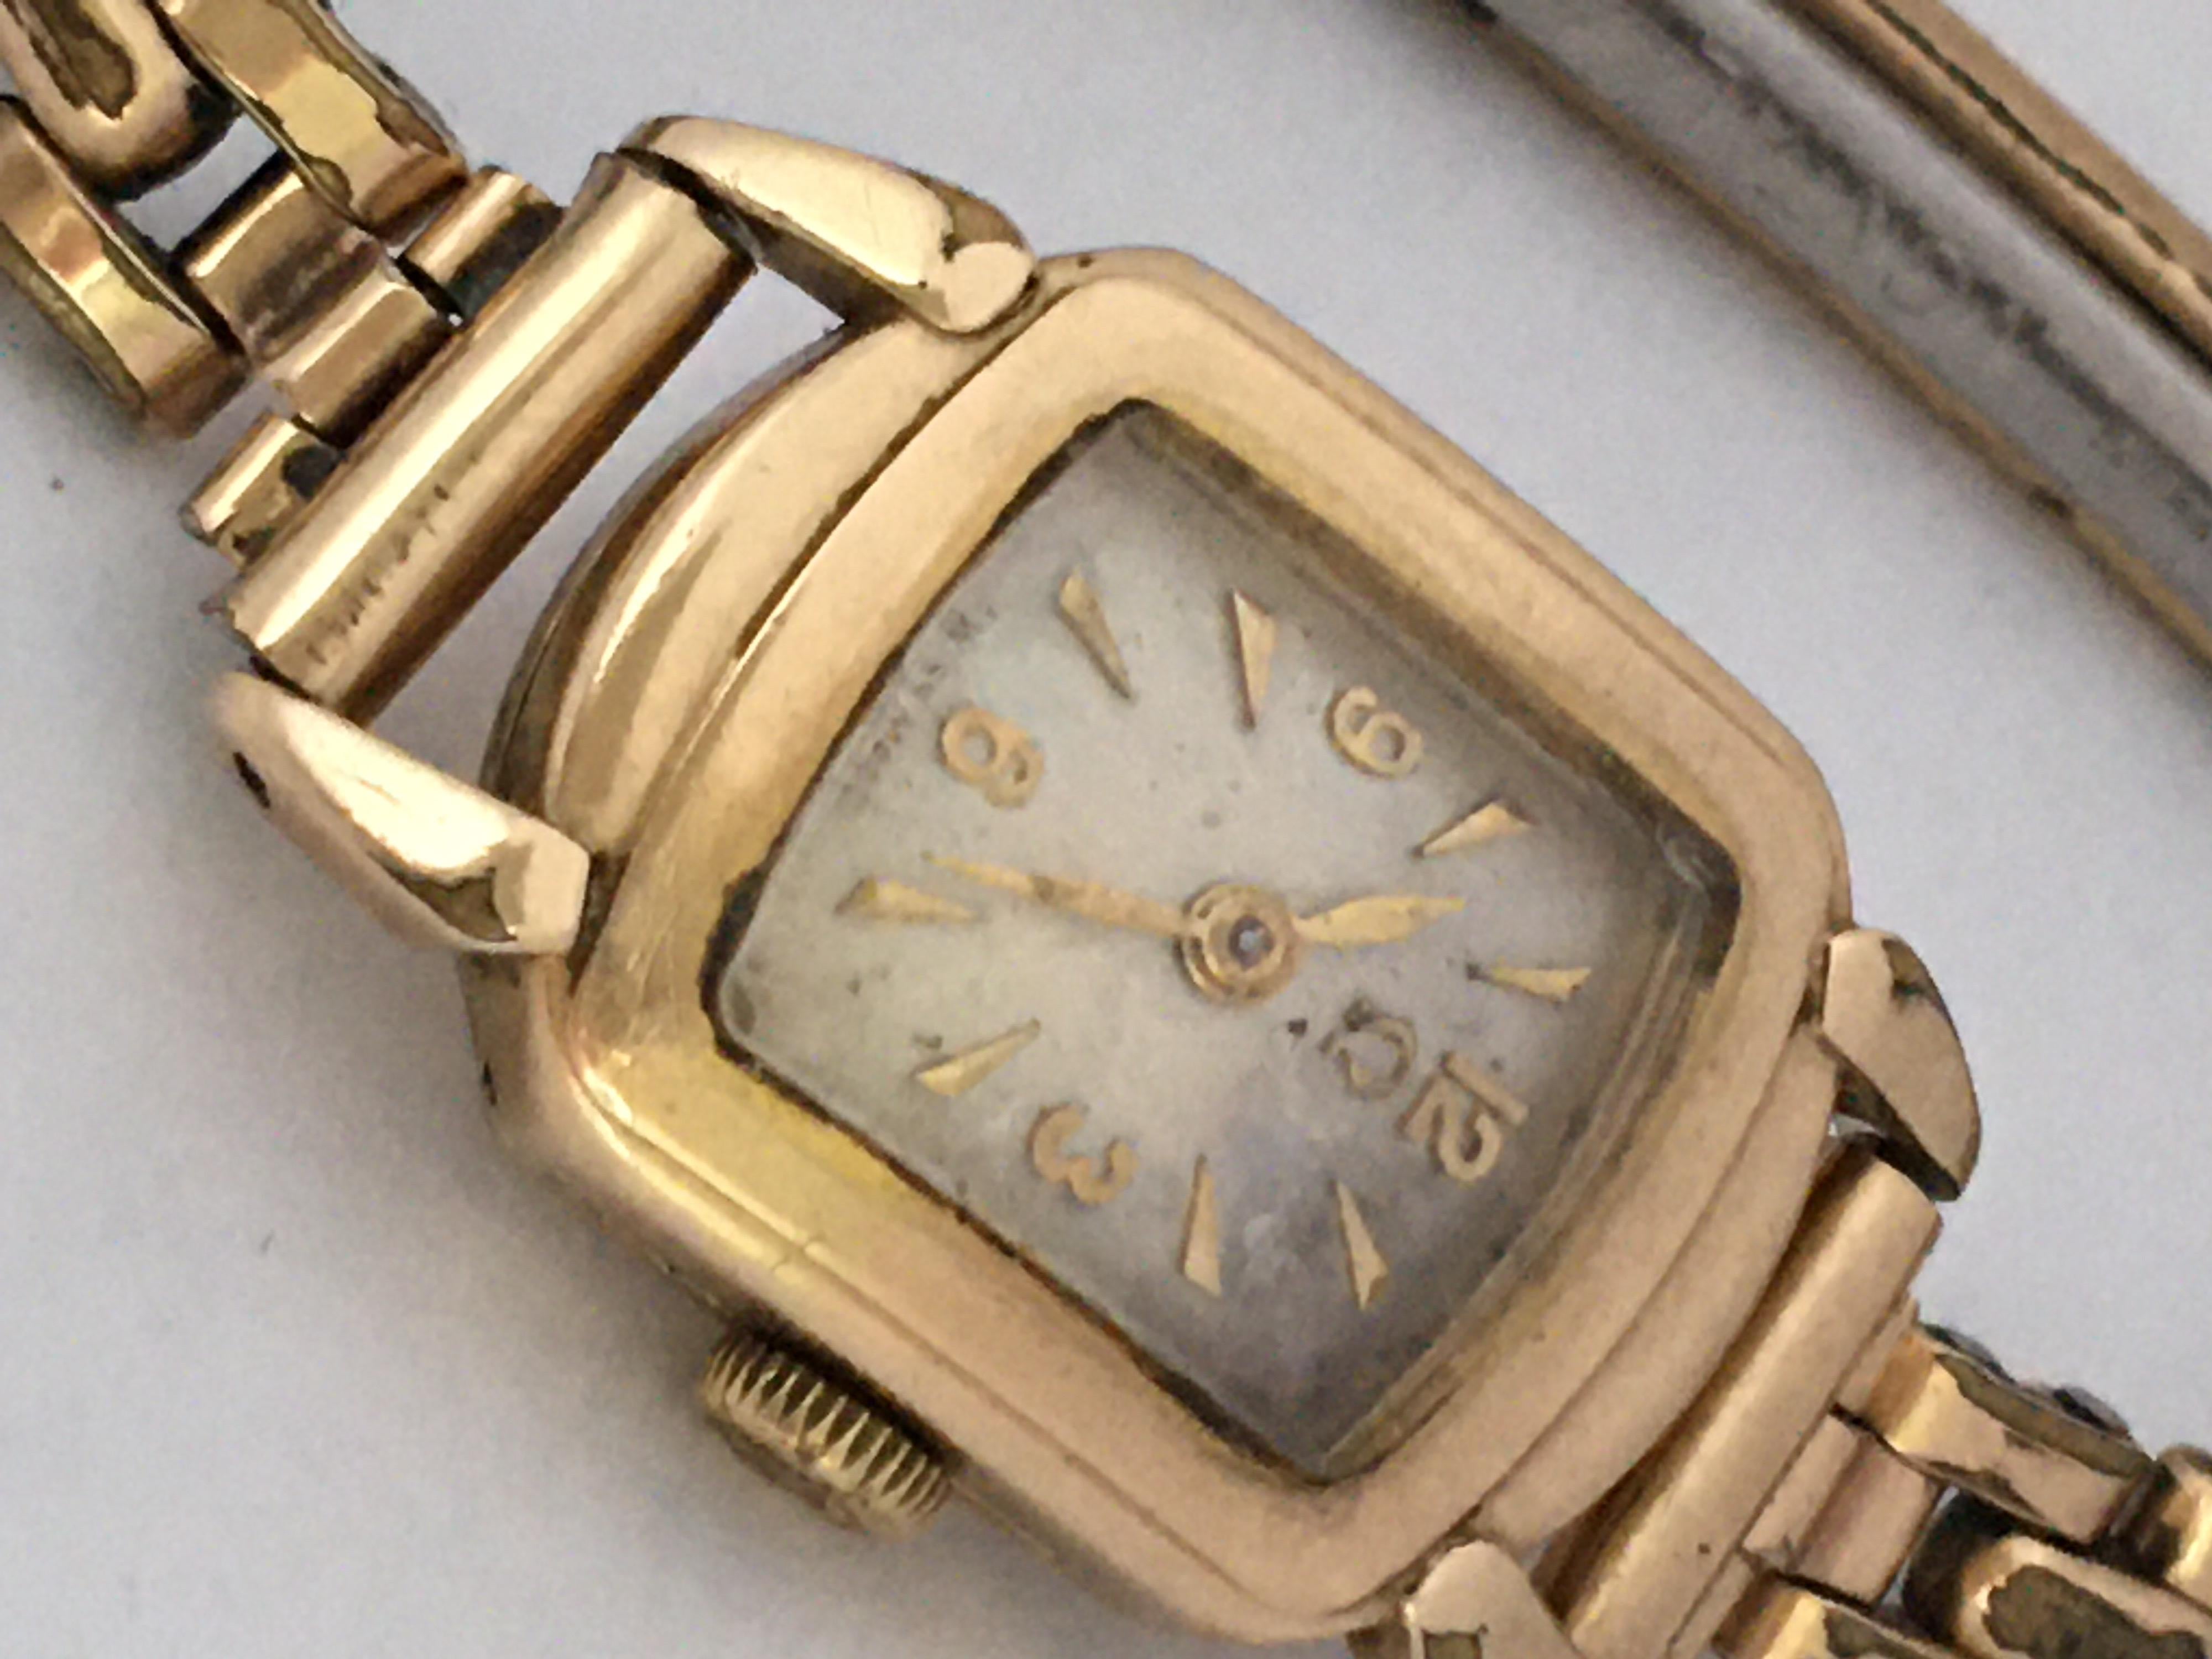 Ladies Omega Vintage Gold-Plated Mechanical Watch For Sale 2